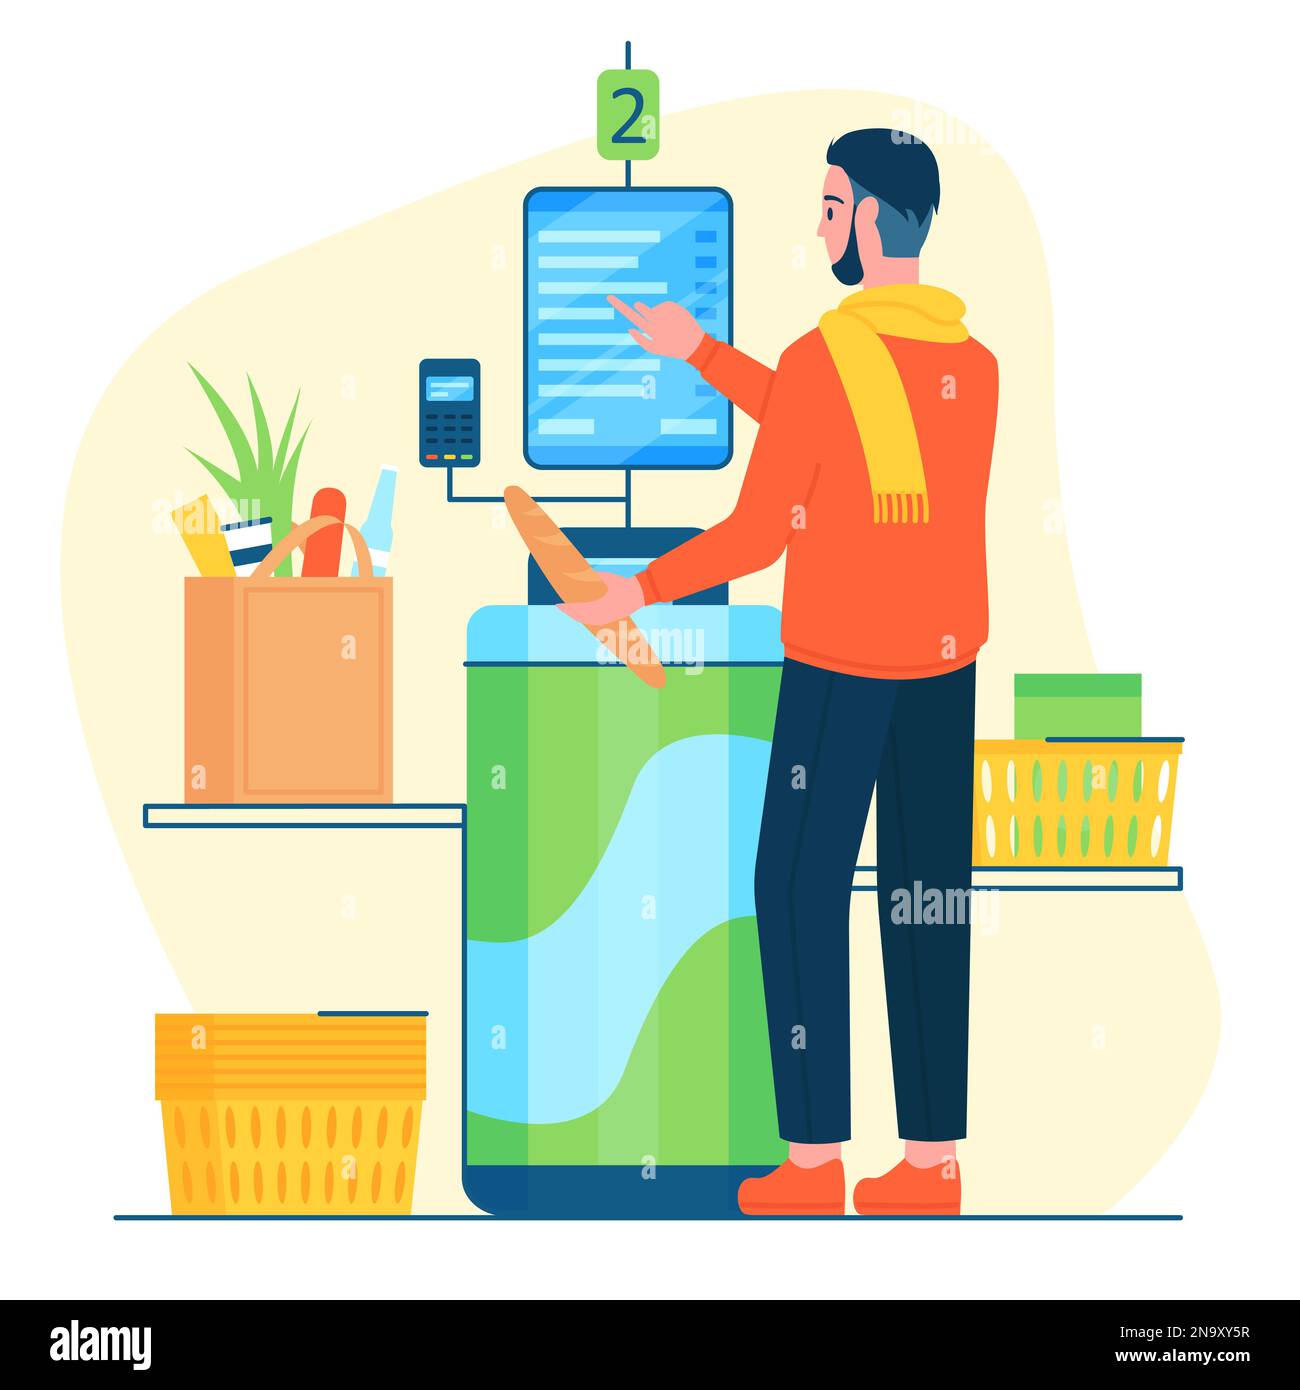 Self service in grocery store, supermarket vector illustration. Cartoon consumer using cashier electronic kiosk with display and automated contactless payment for products and purchases in retail shop Stock Vector